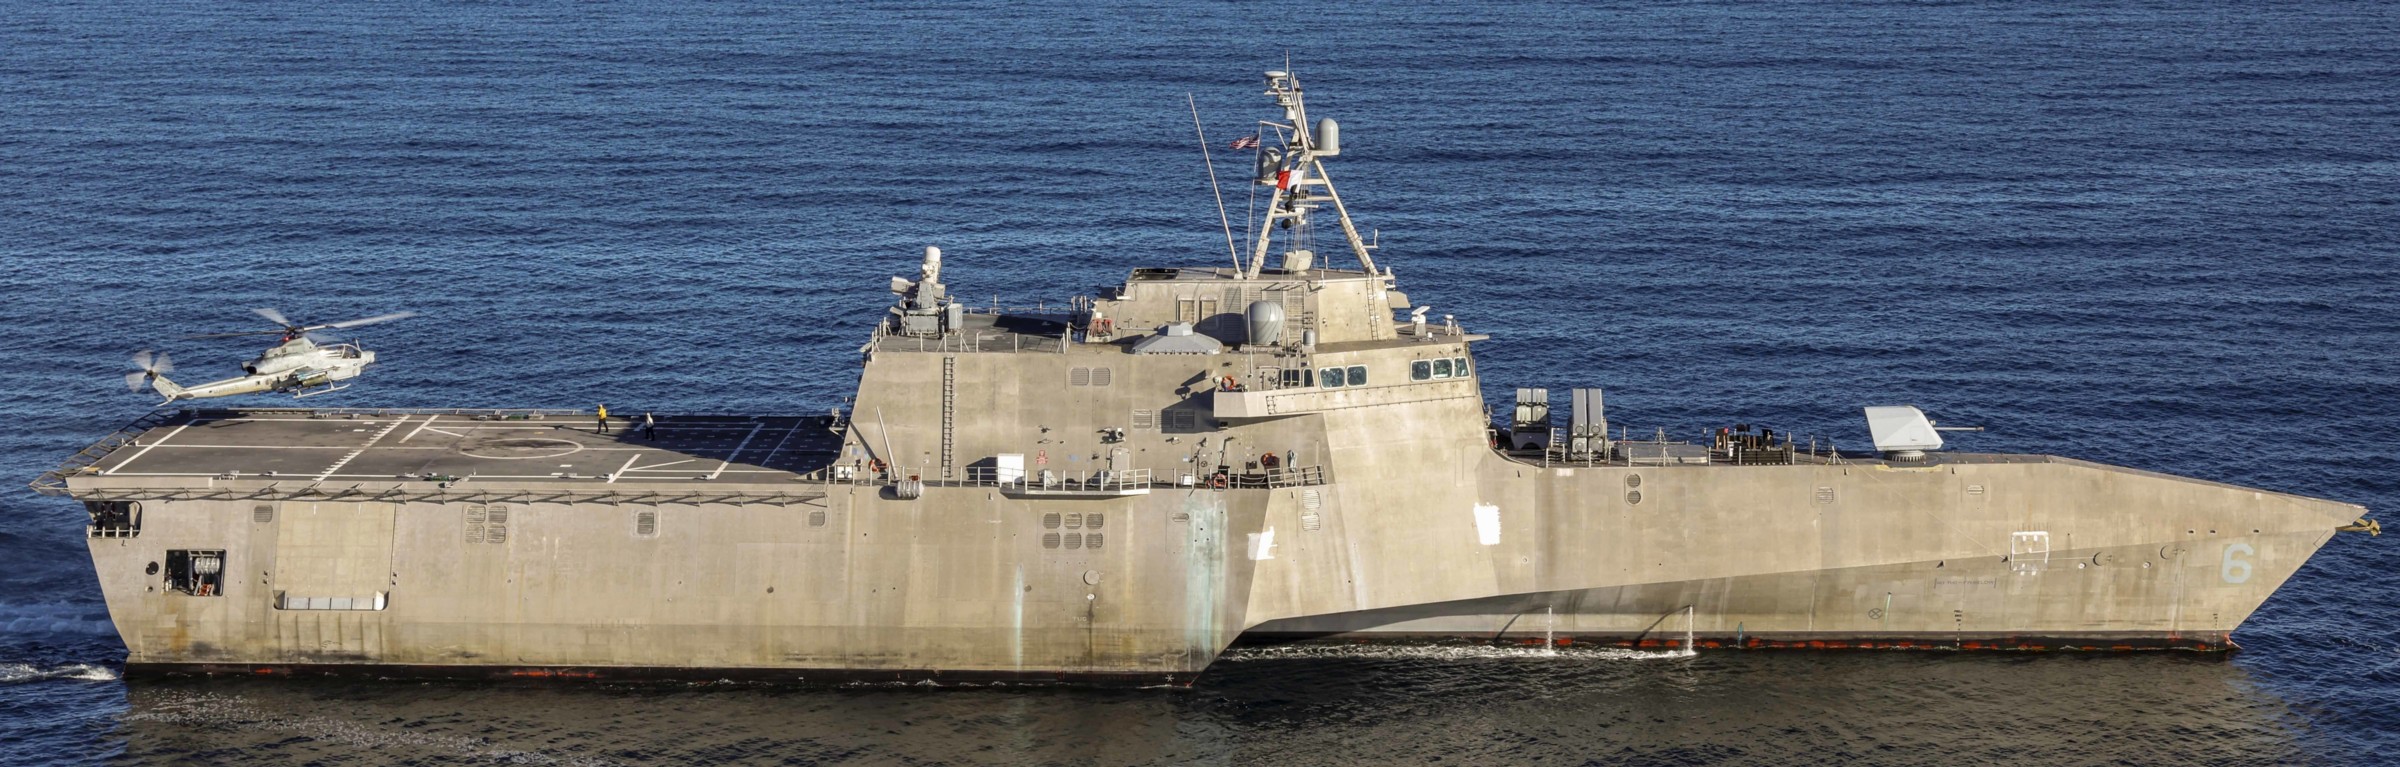 lcs-6 uss jackson independence class littoral combat ship us navy 55 ah-1z viper helicopter